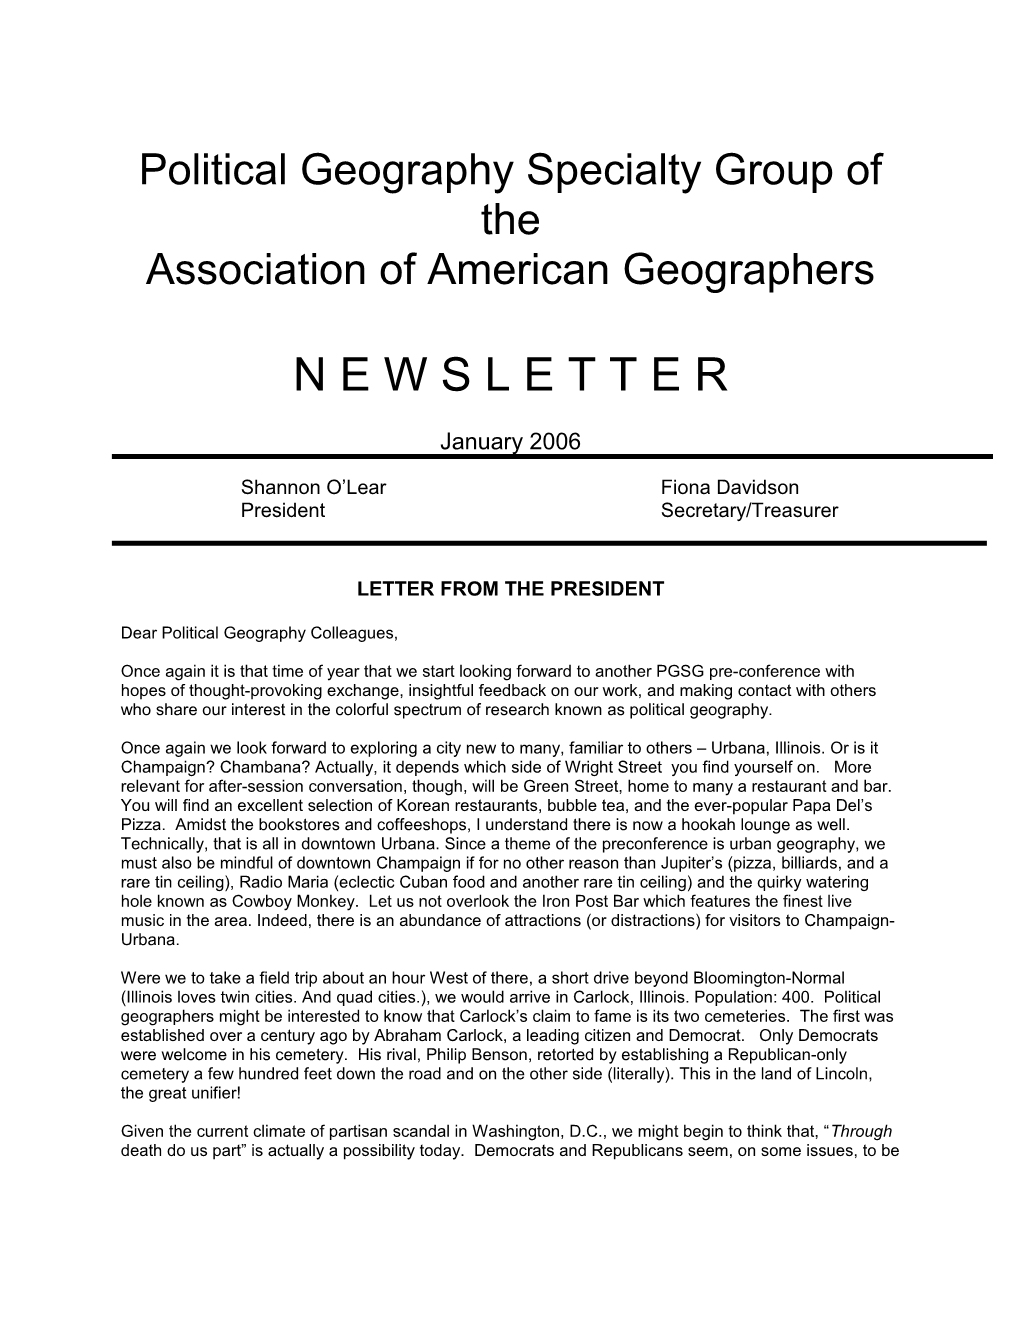 Political Geography Specialty Group of The